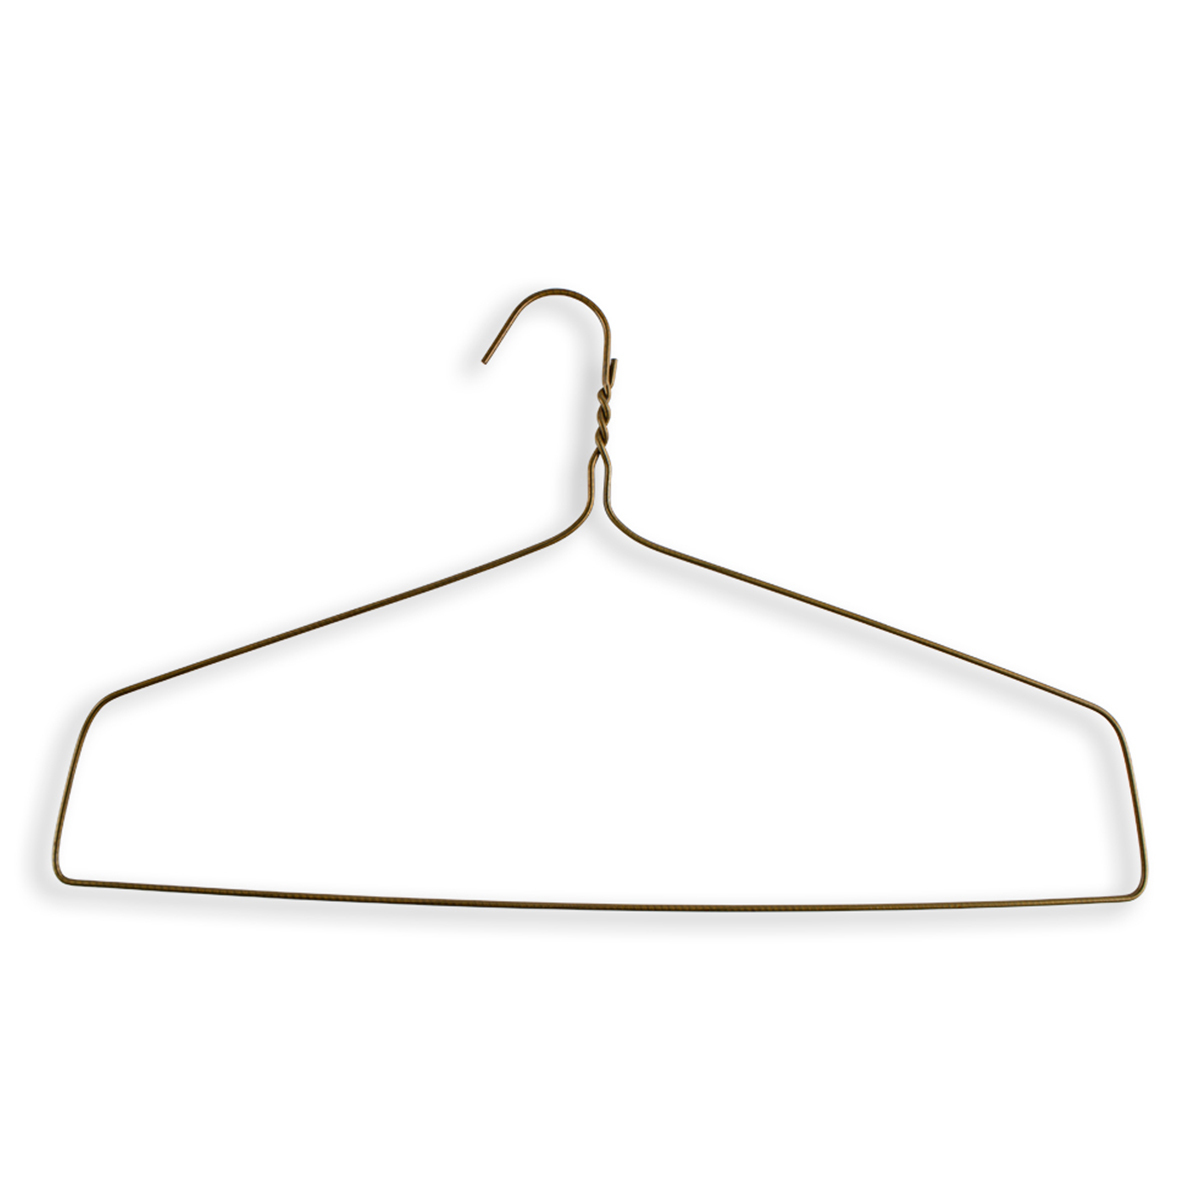 Plastic Suit Hangers - Clear - Cleaner's Supply